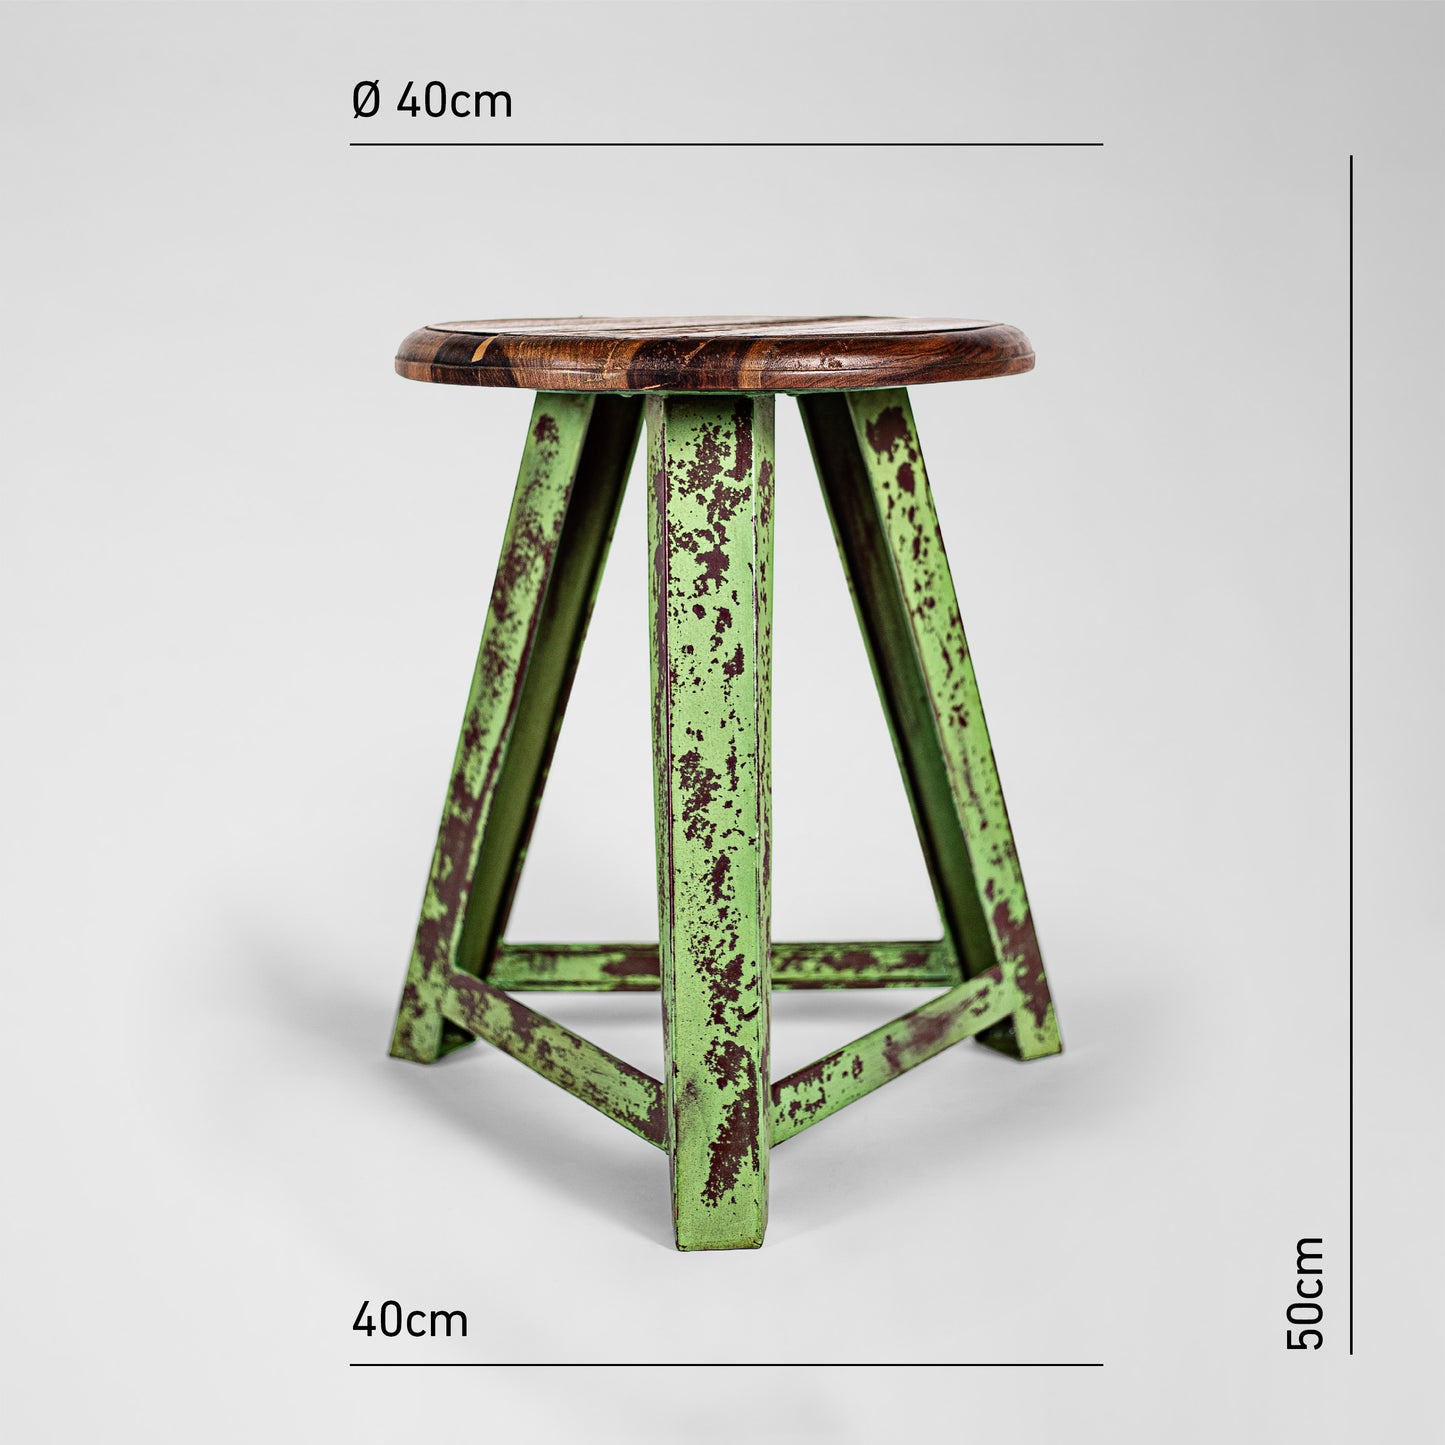 Hank the Tank – Handmade industrial design stool made of metal with wooden seat in vintage green